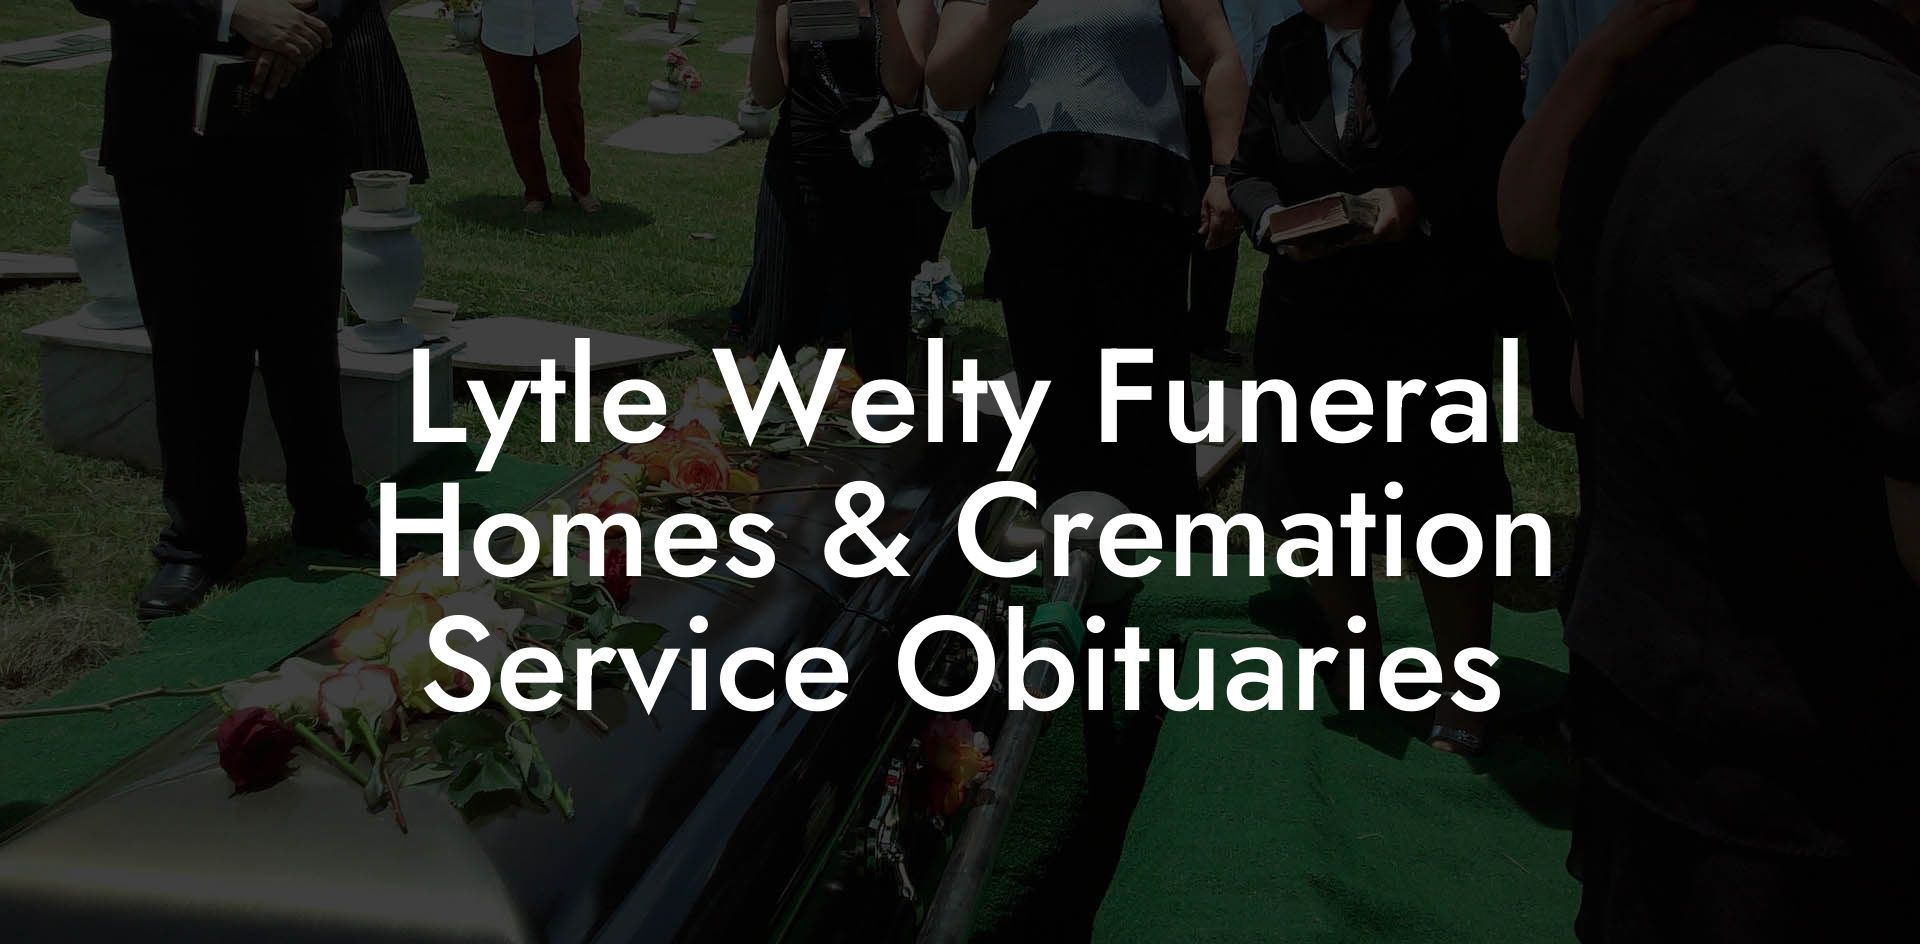 Lytle Welty Funeral Homes & Cremation Service Obituaries